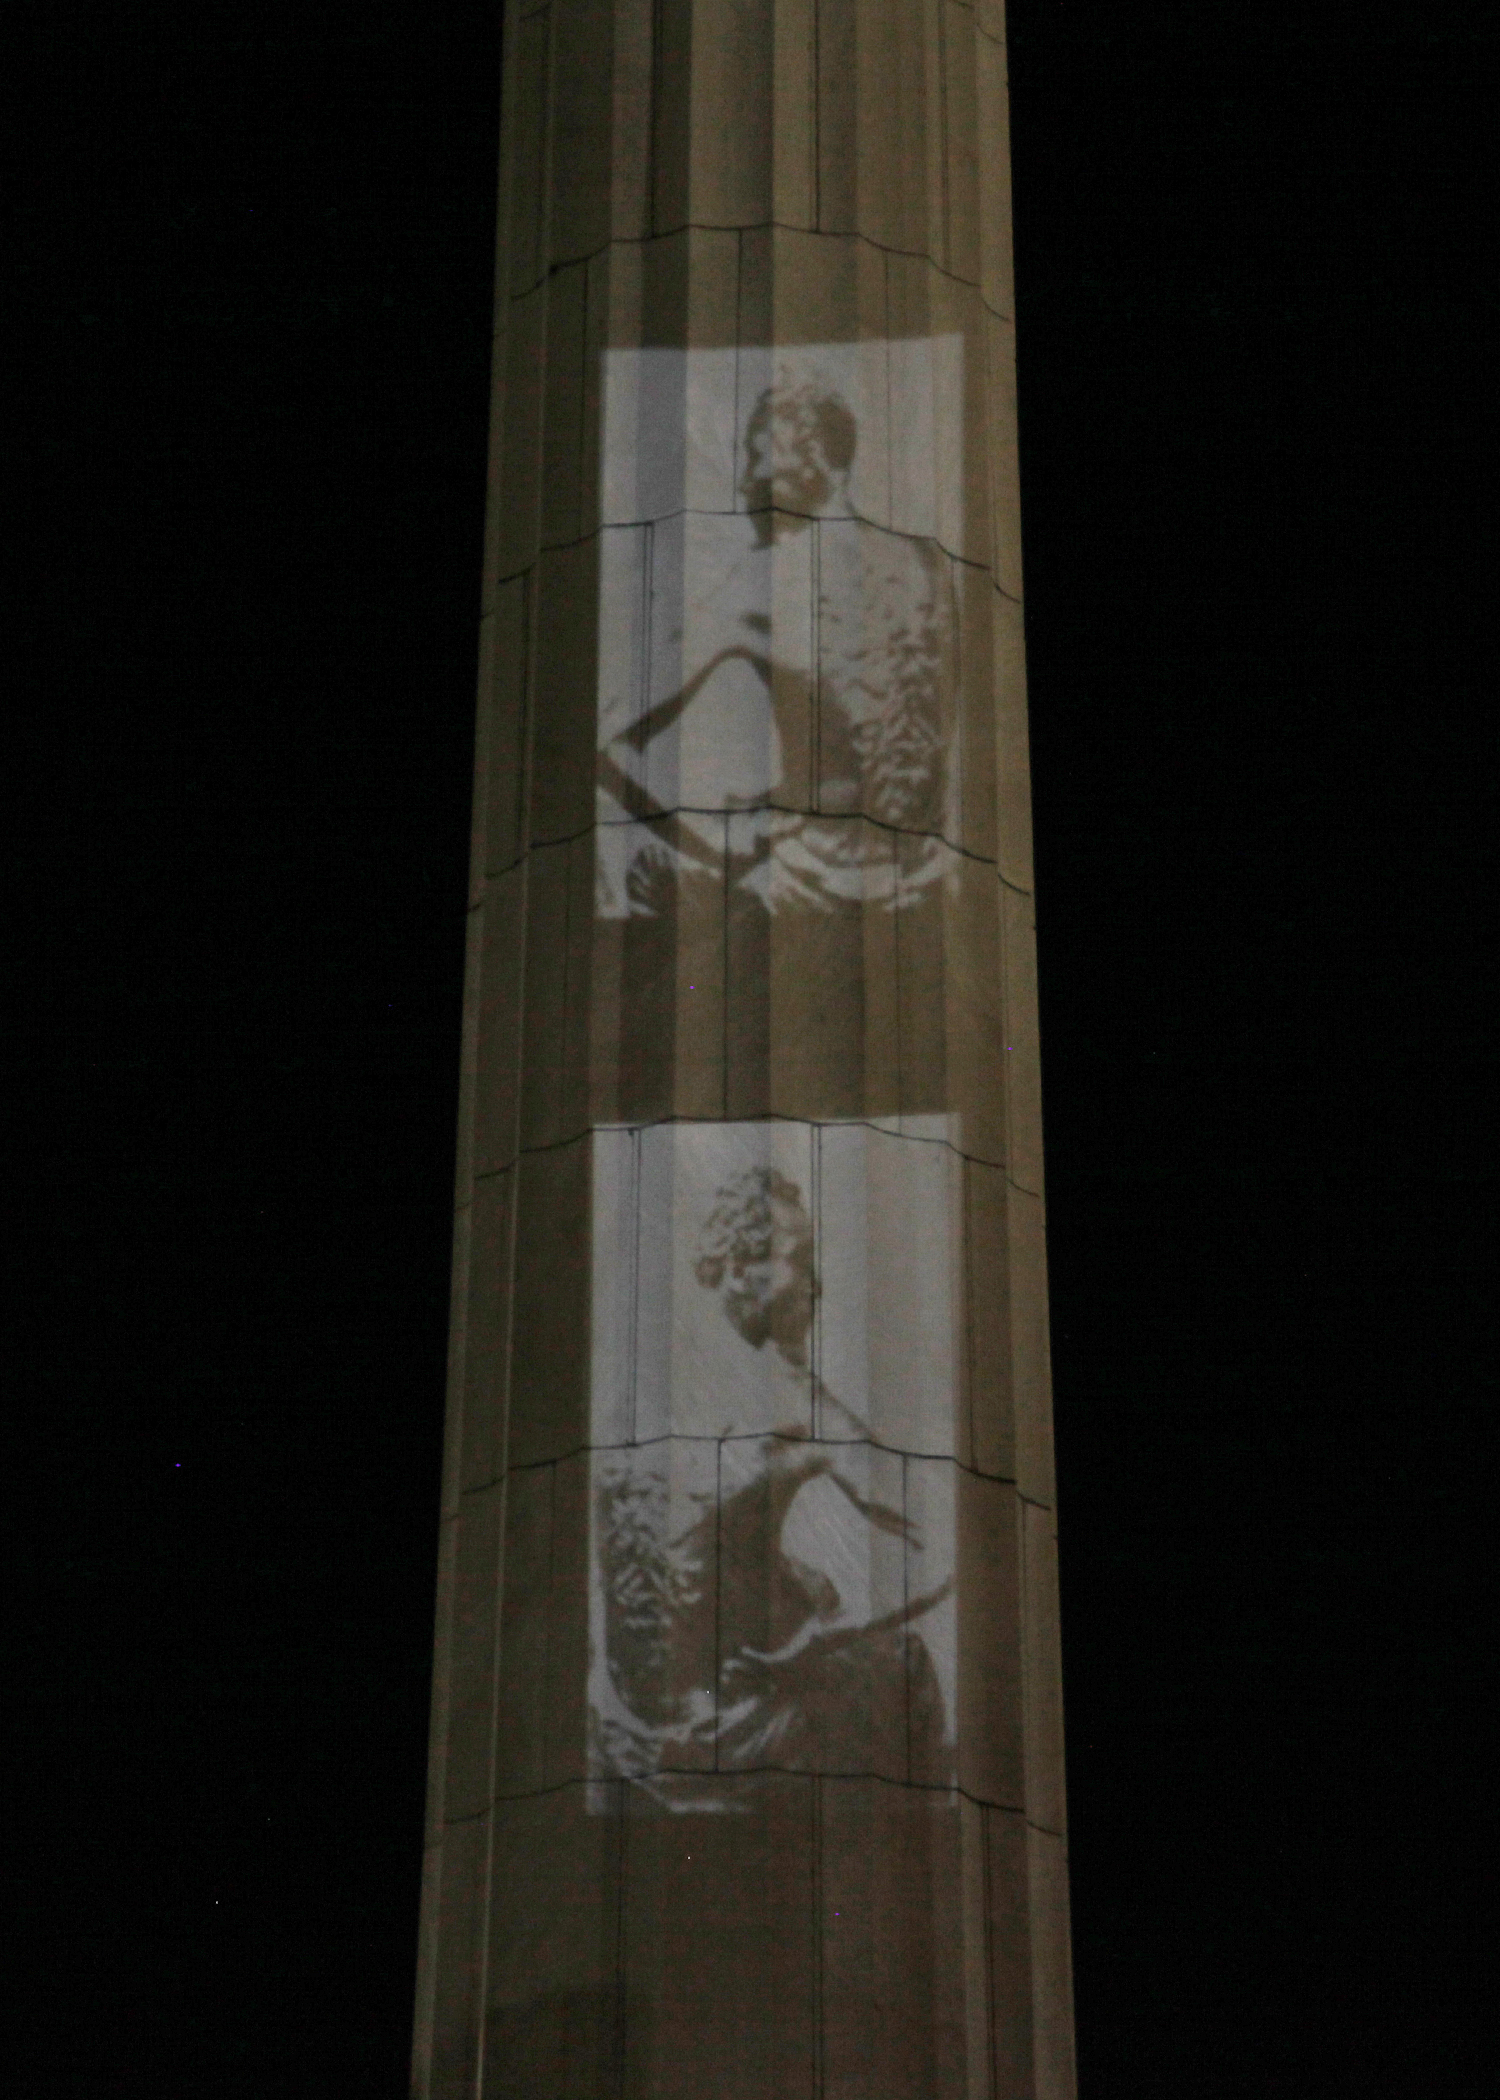 The Take 'Em Down NOLA group projected images of the scarred backs of slaves onto a monument to Confederate General Robert E Lee [Roopa Gogineni] [Daylife]